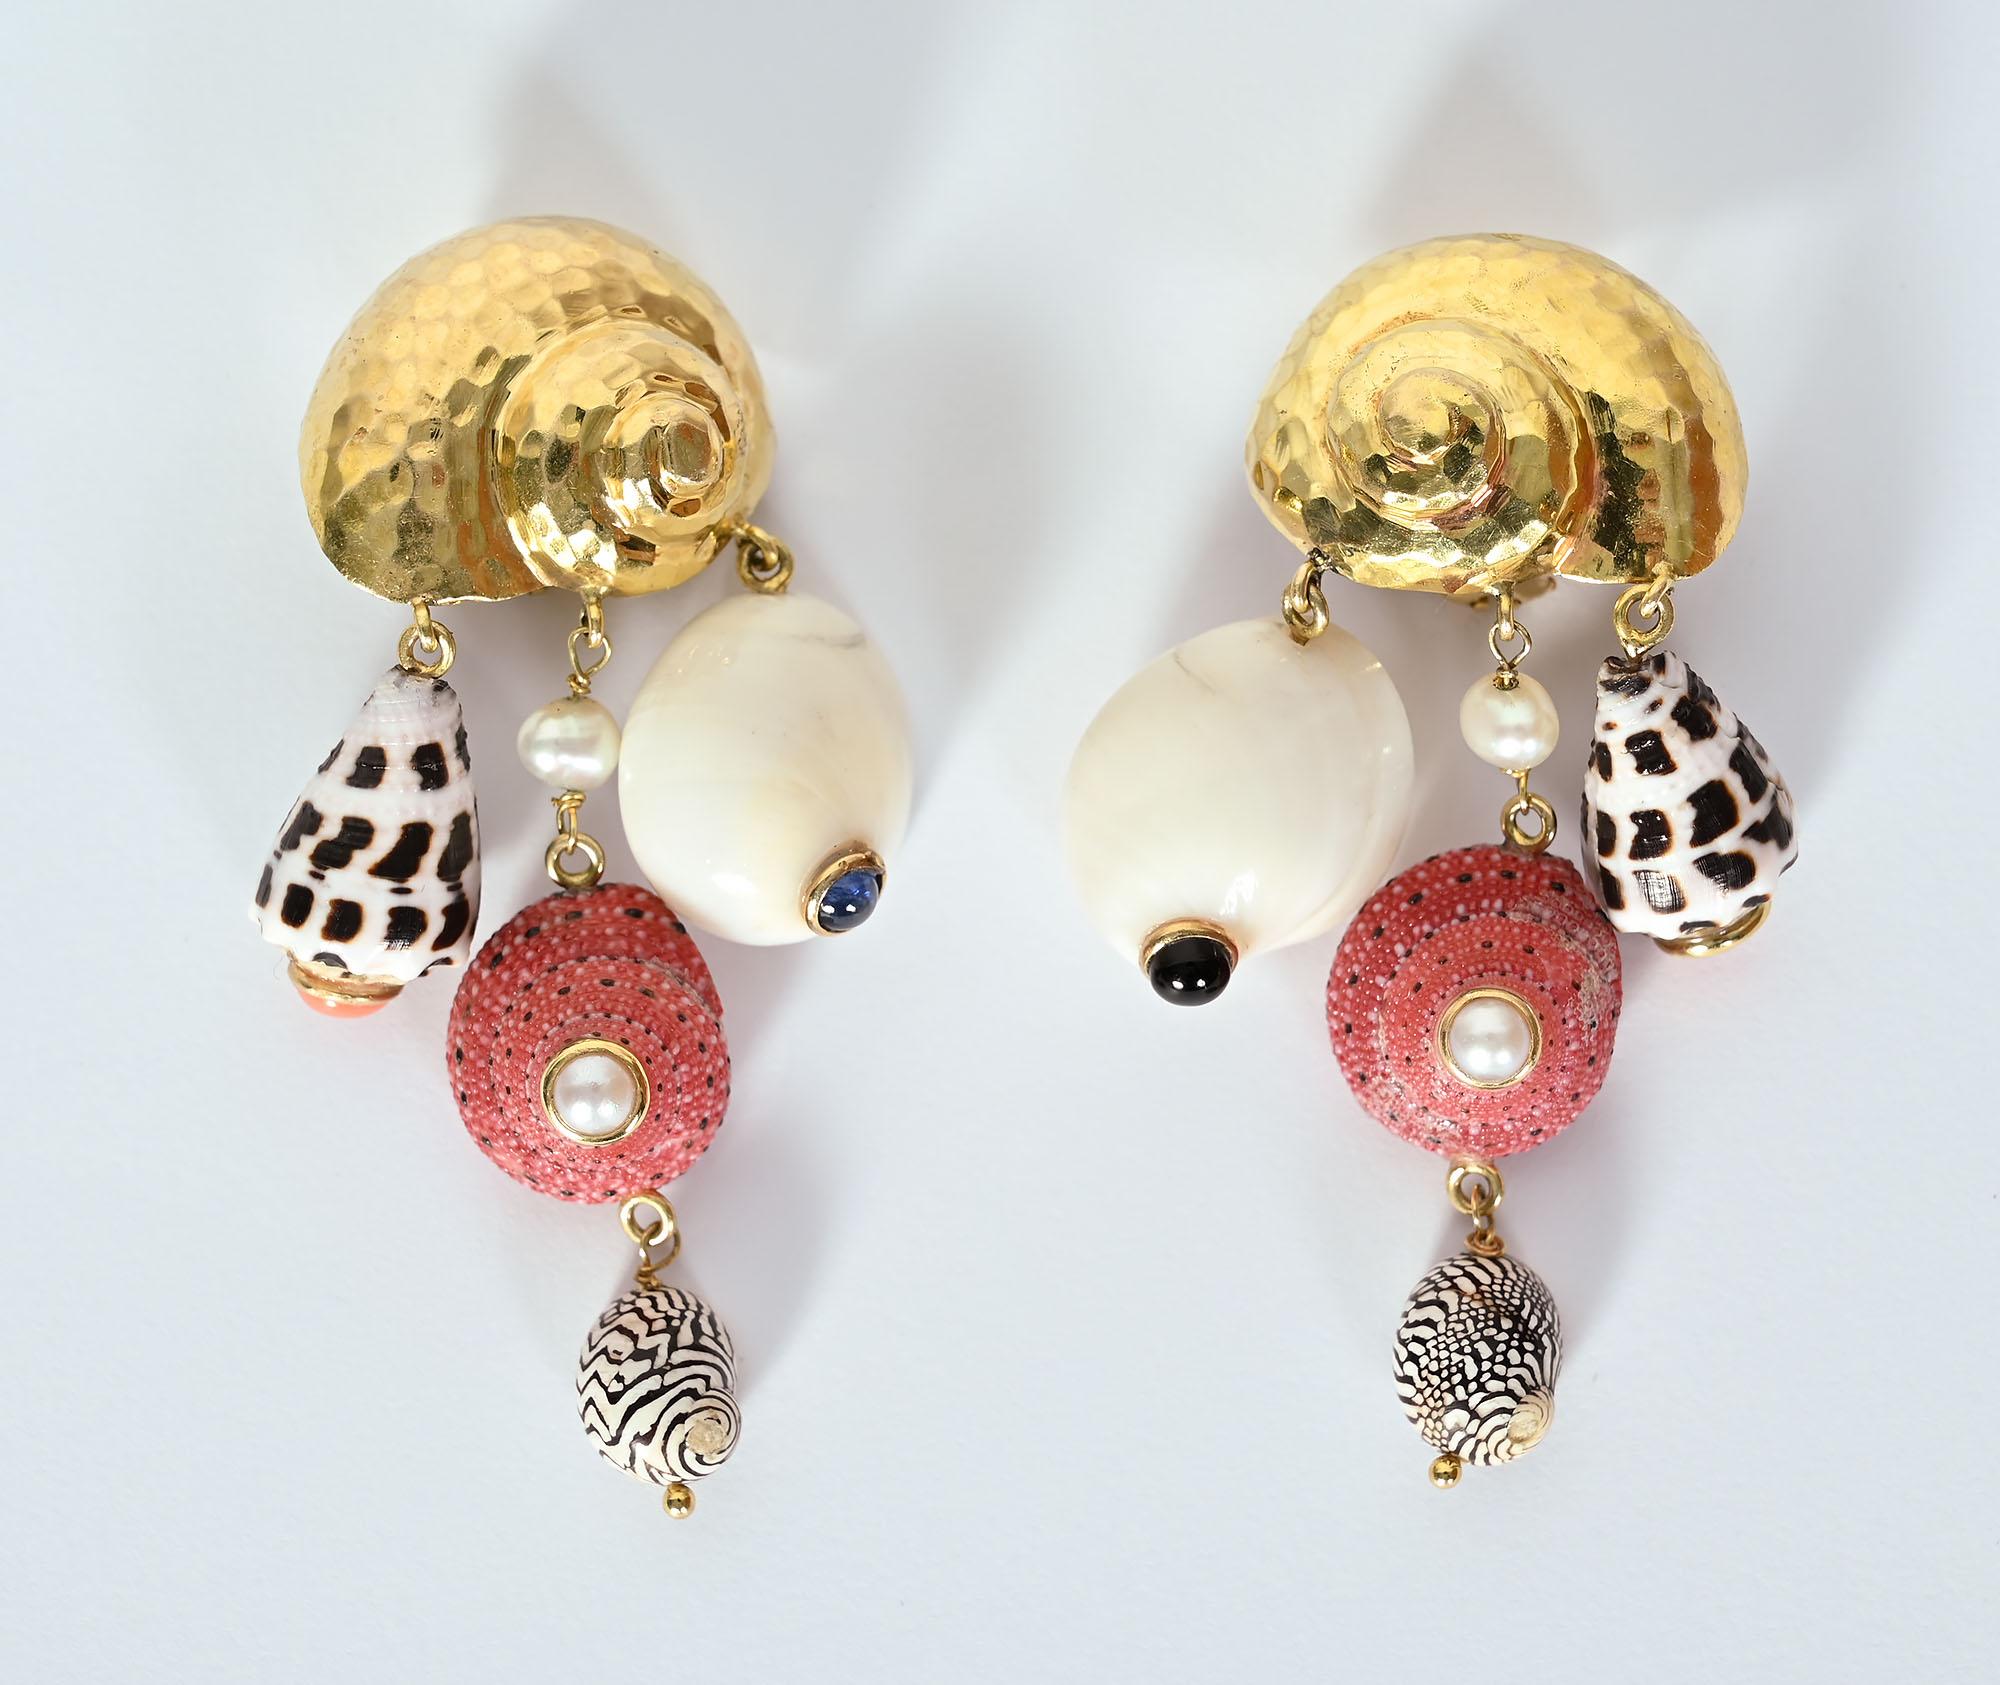 Charming and playful gold shell earrings from which four actual shells are suspended. The gold shell has a hammered finish. The middle shell has a pearl above it and inserted in its middle. The white shells are each centered with a cabochon